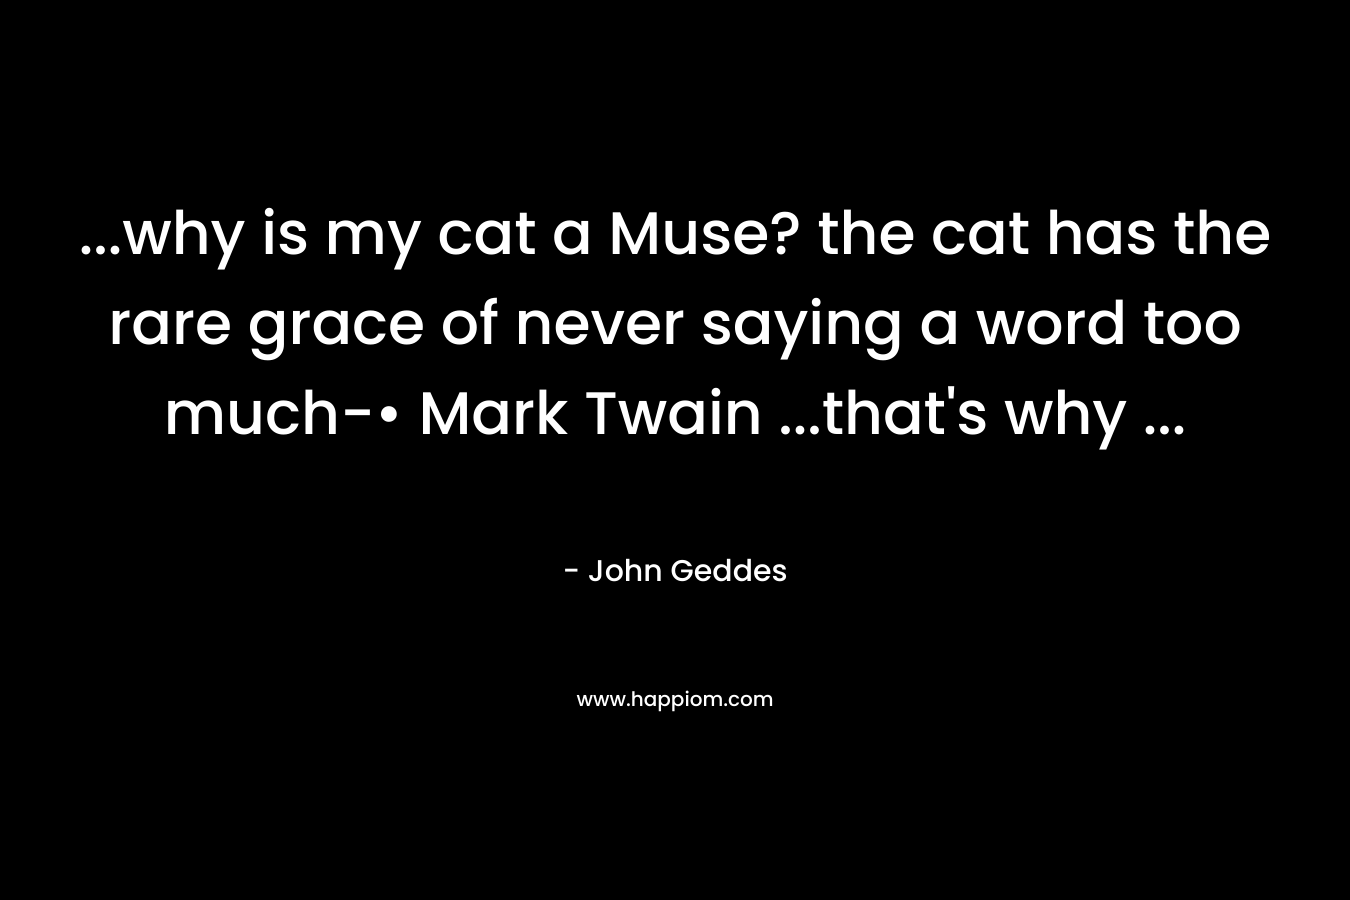 ...why is my cat a Muse? the cat has the rare grace of never saying a word too much-• Mark Twain ...that's why ...